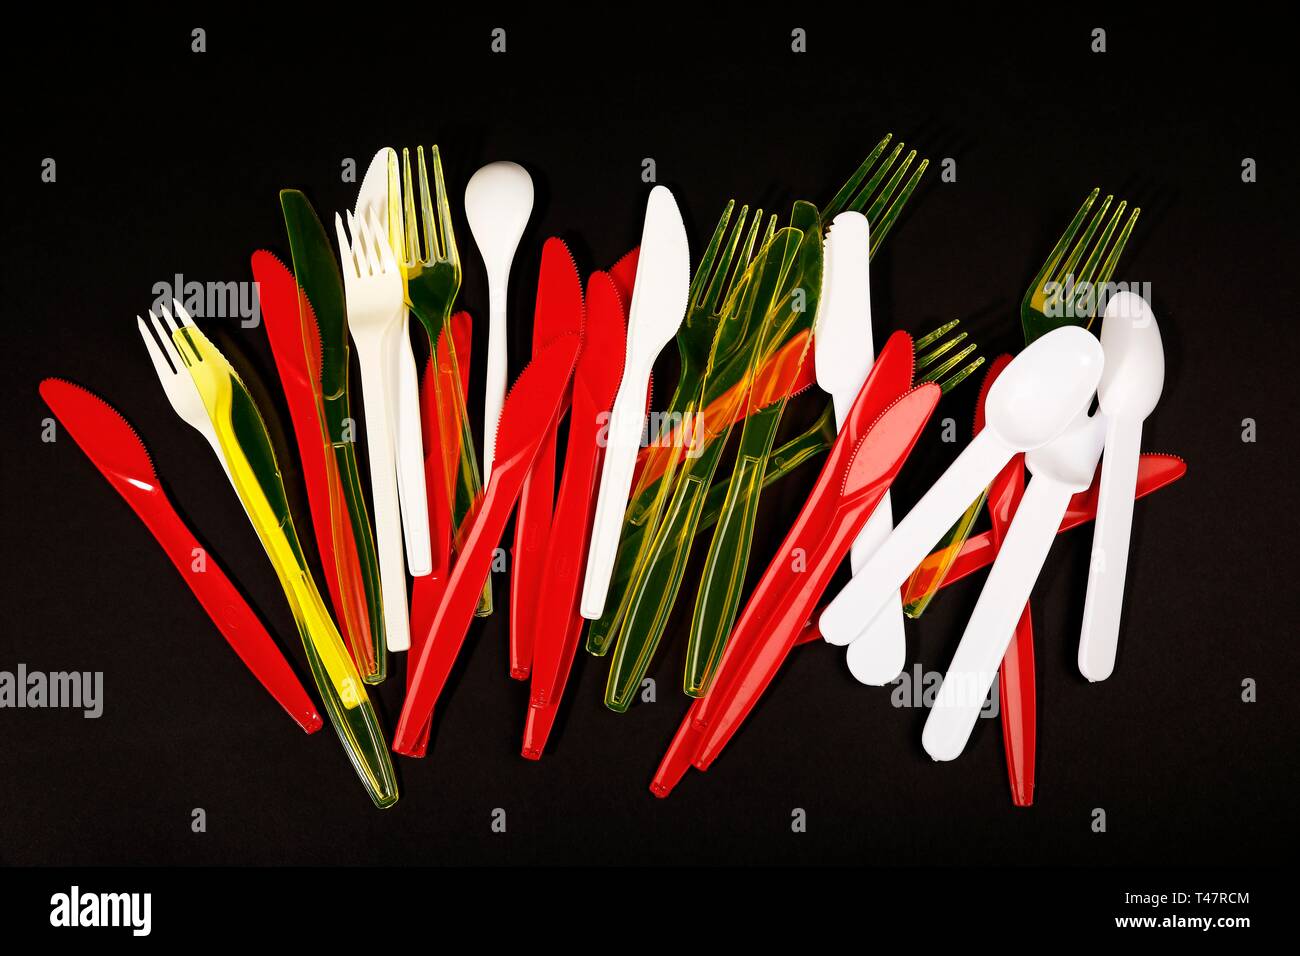 Red, yellow and white plastic cutlery, plastic knives, plastic forks, plastic spoons, plastic waste, Germany Stock Photo